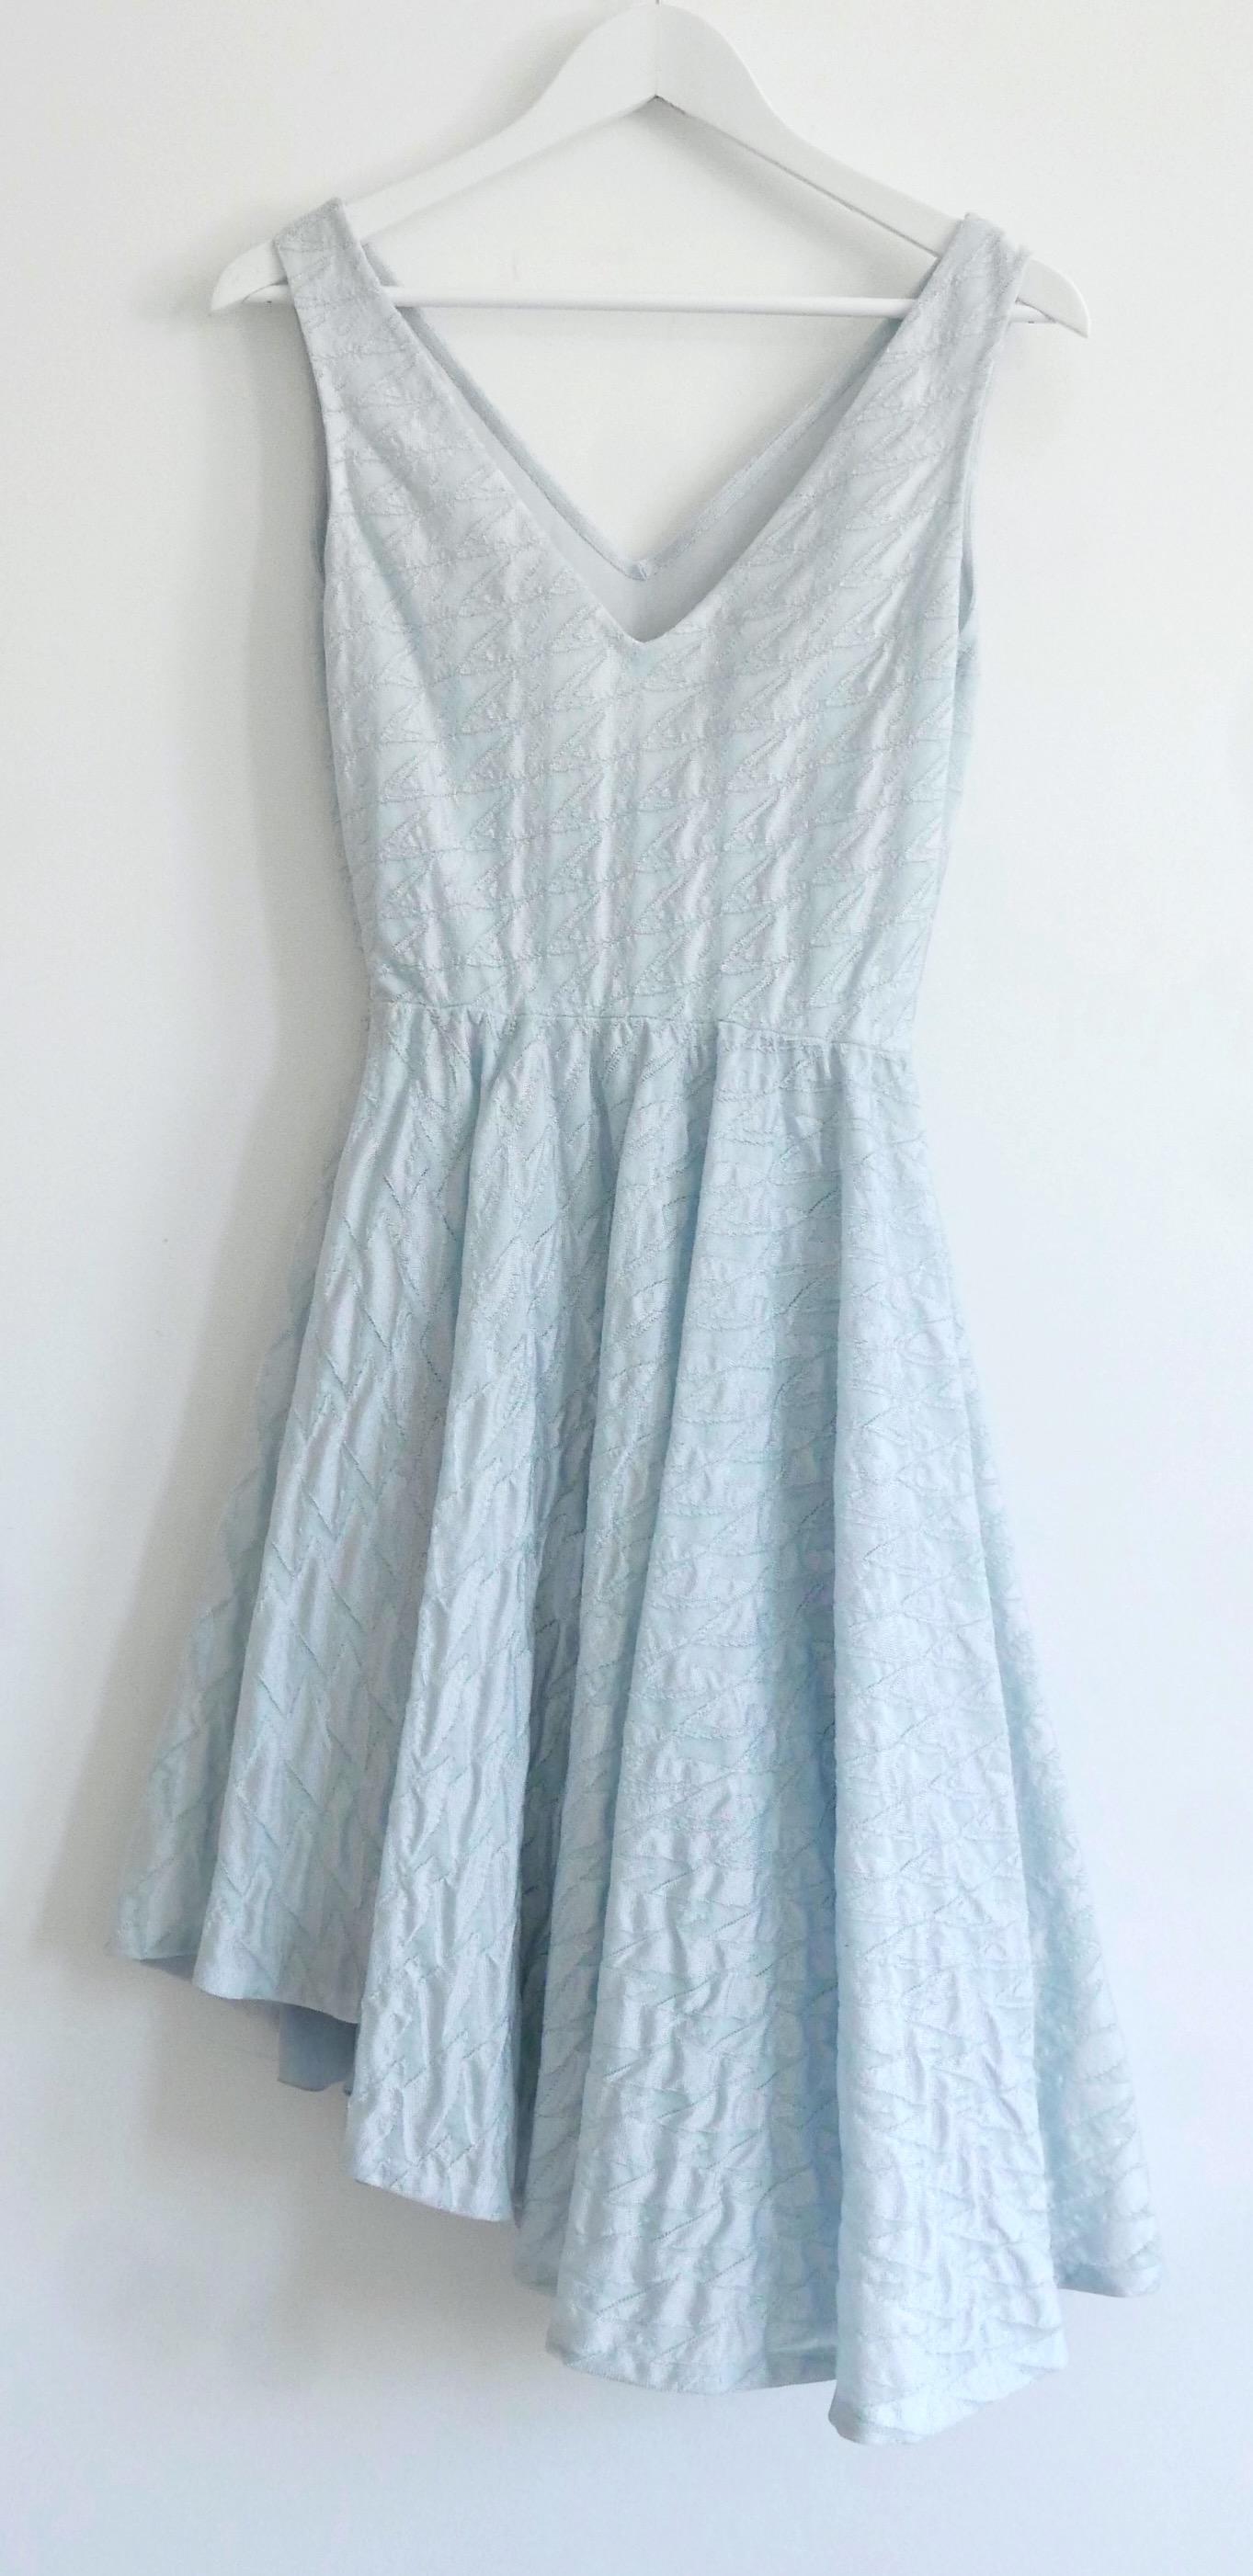 Dior x Raf Simons Dior Fall 2014 Pale Blue Textured Dress In New Condition For Sale In London, GB